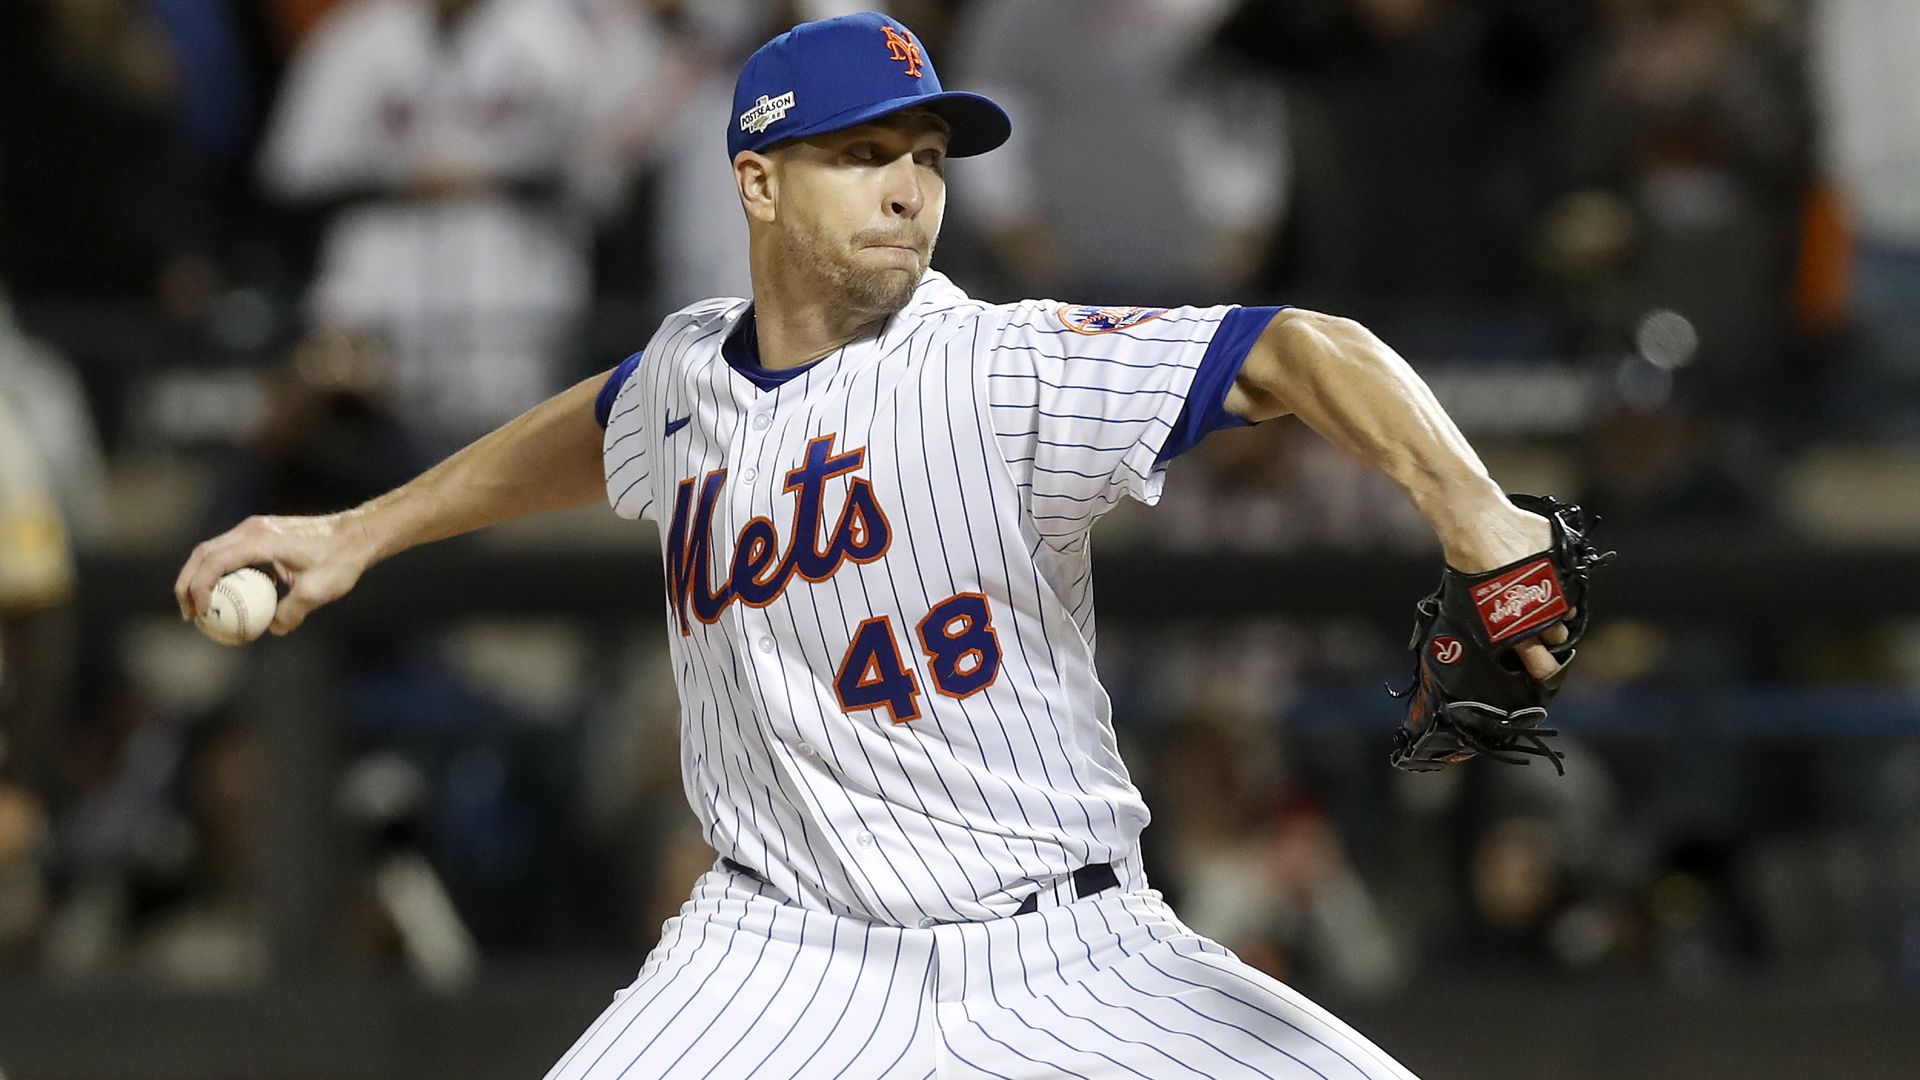 Pitcher Jacob deGrom in a New York Mets uniform